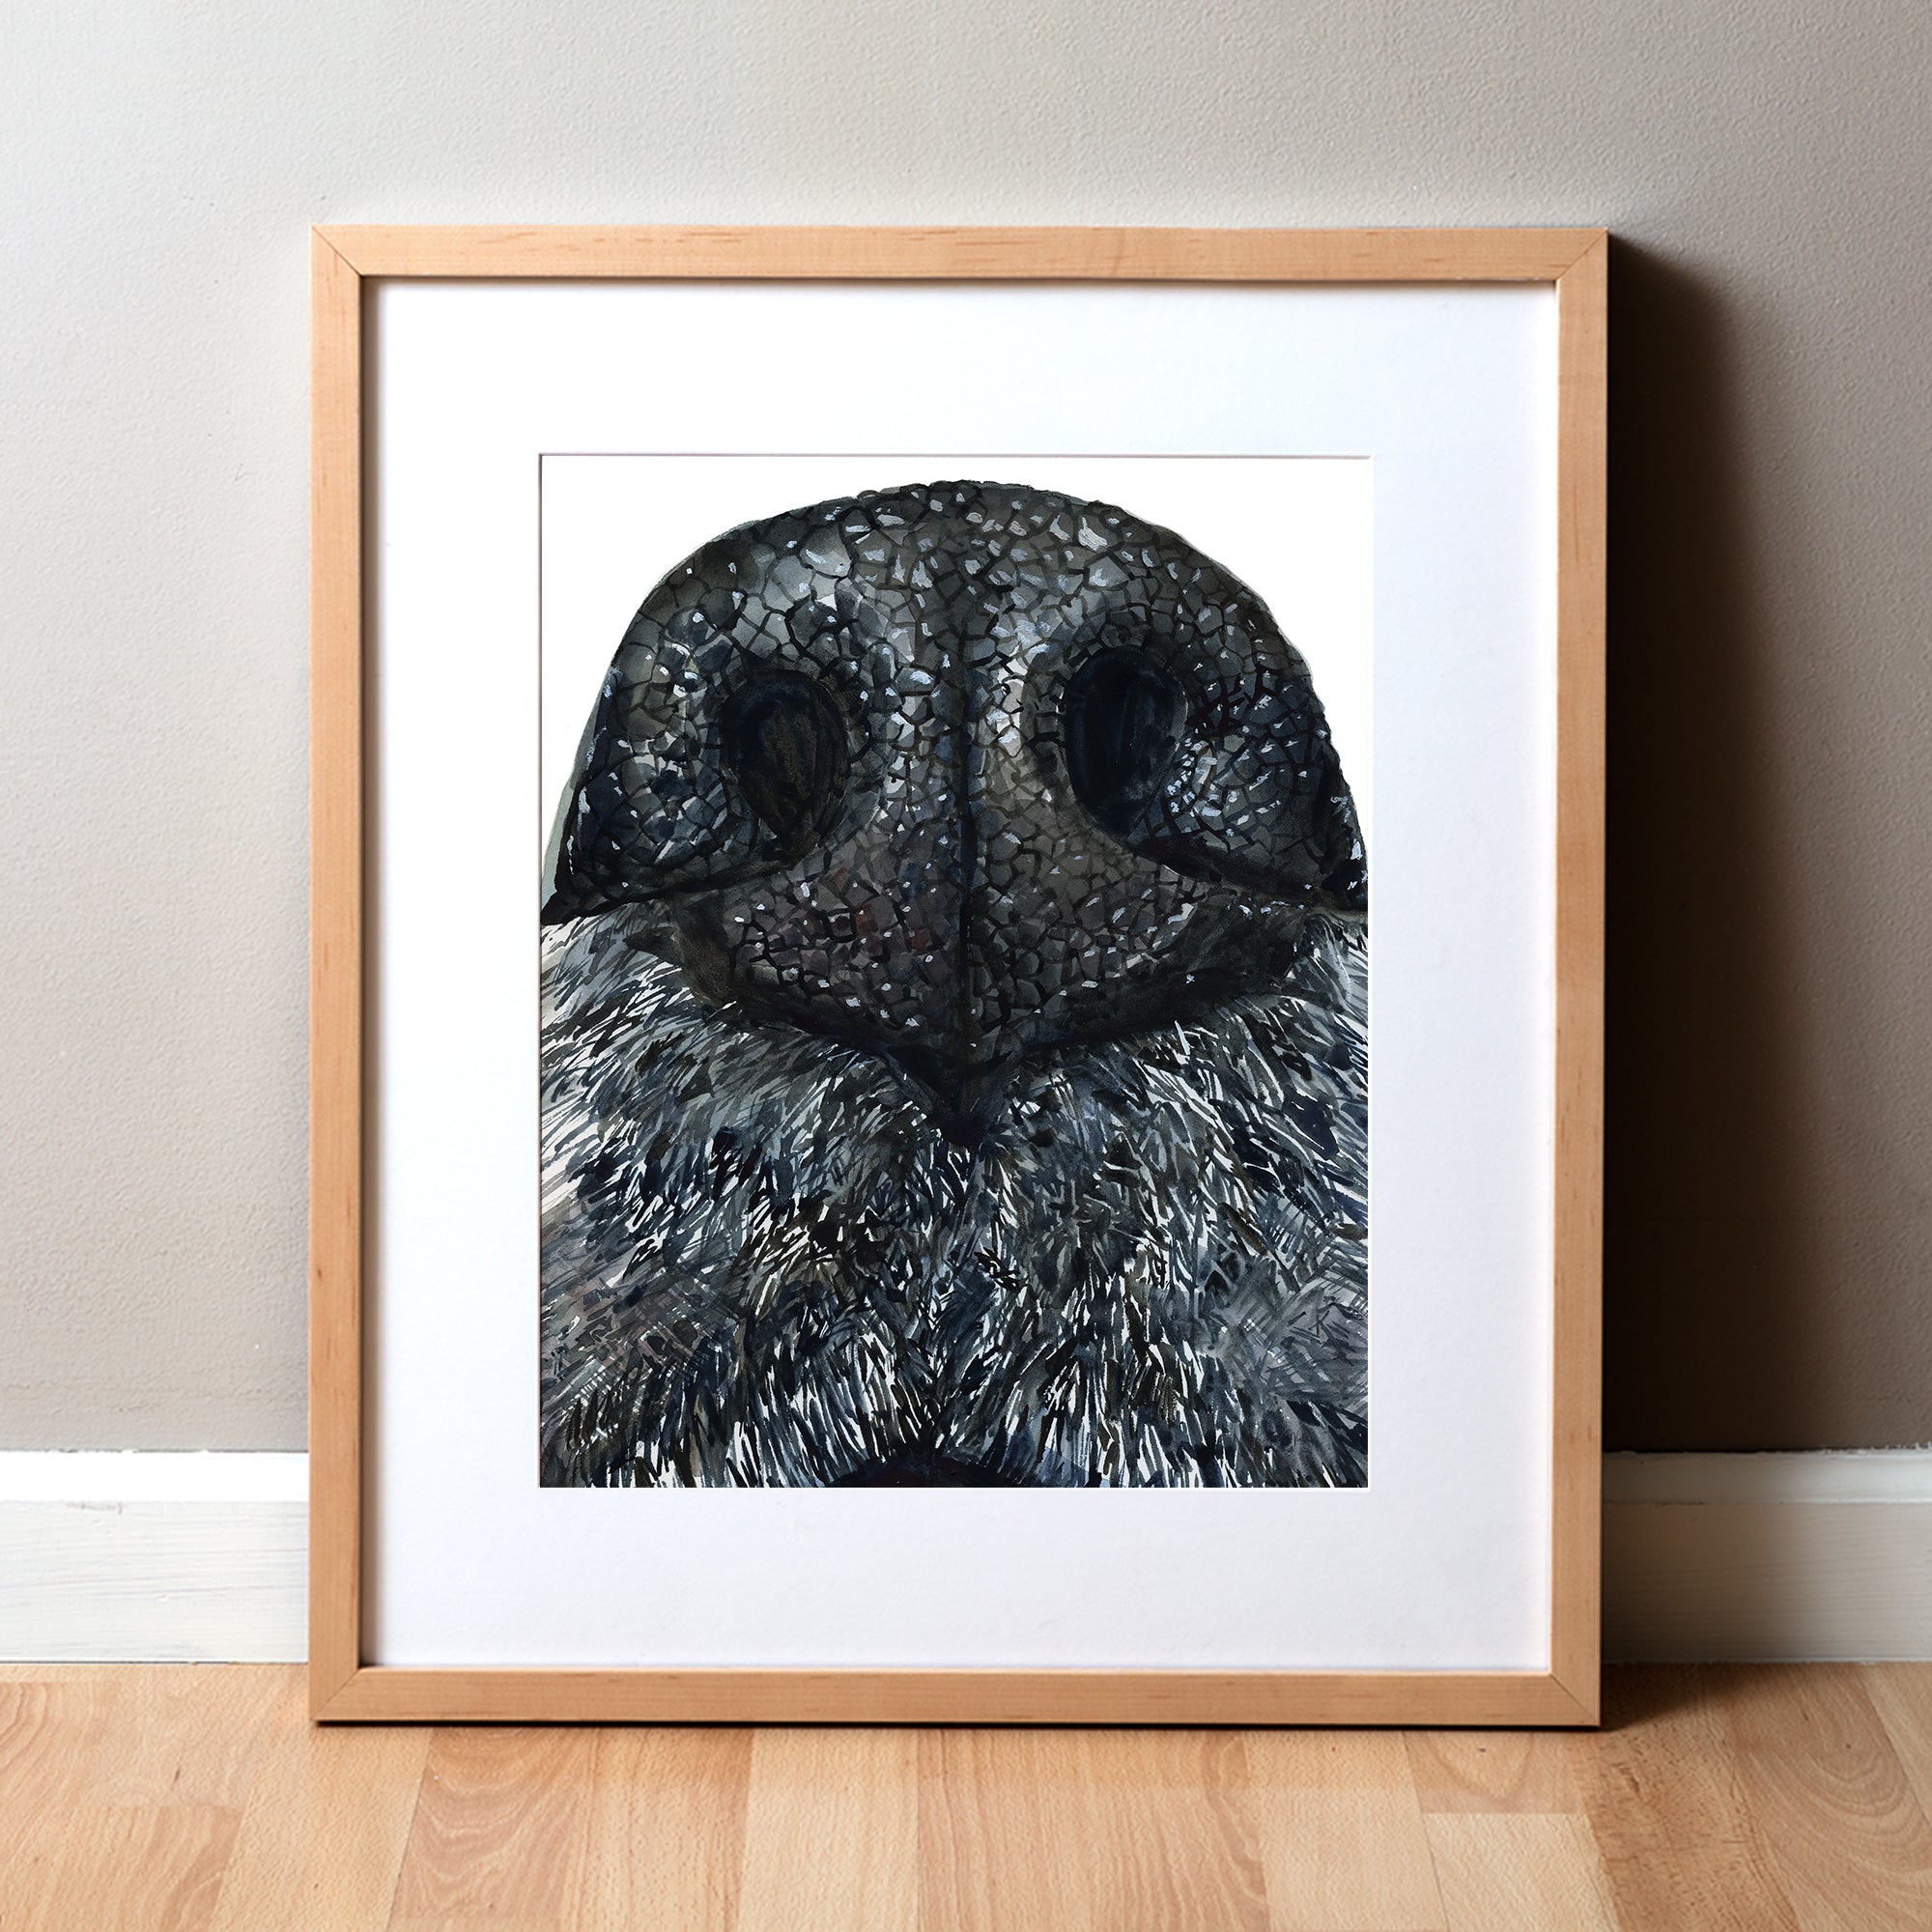 Framed watercolor painting of a zoomed in perspective of a dog’s nose. The painting is in black and white.